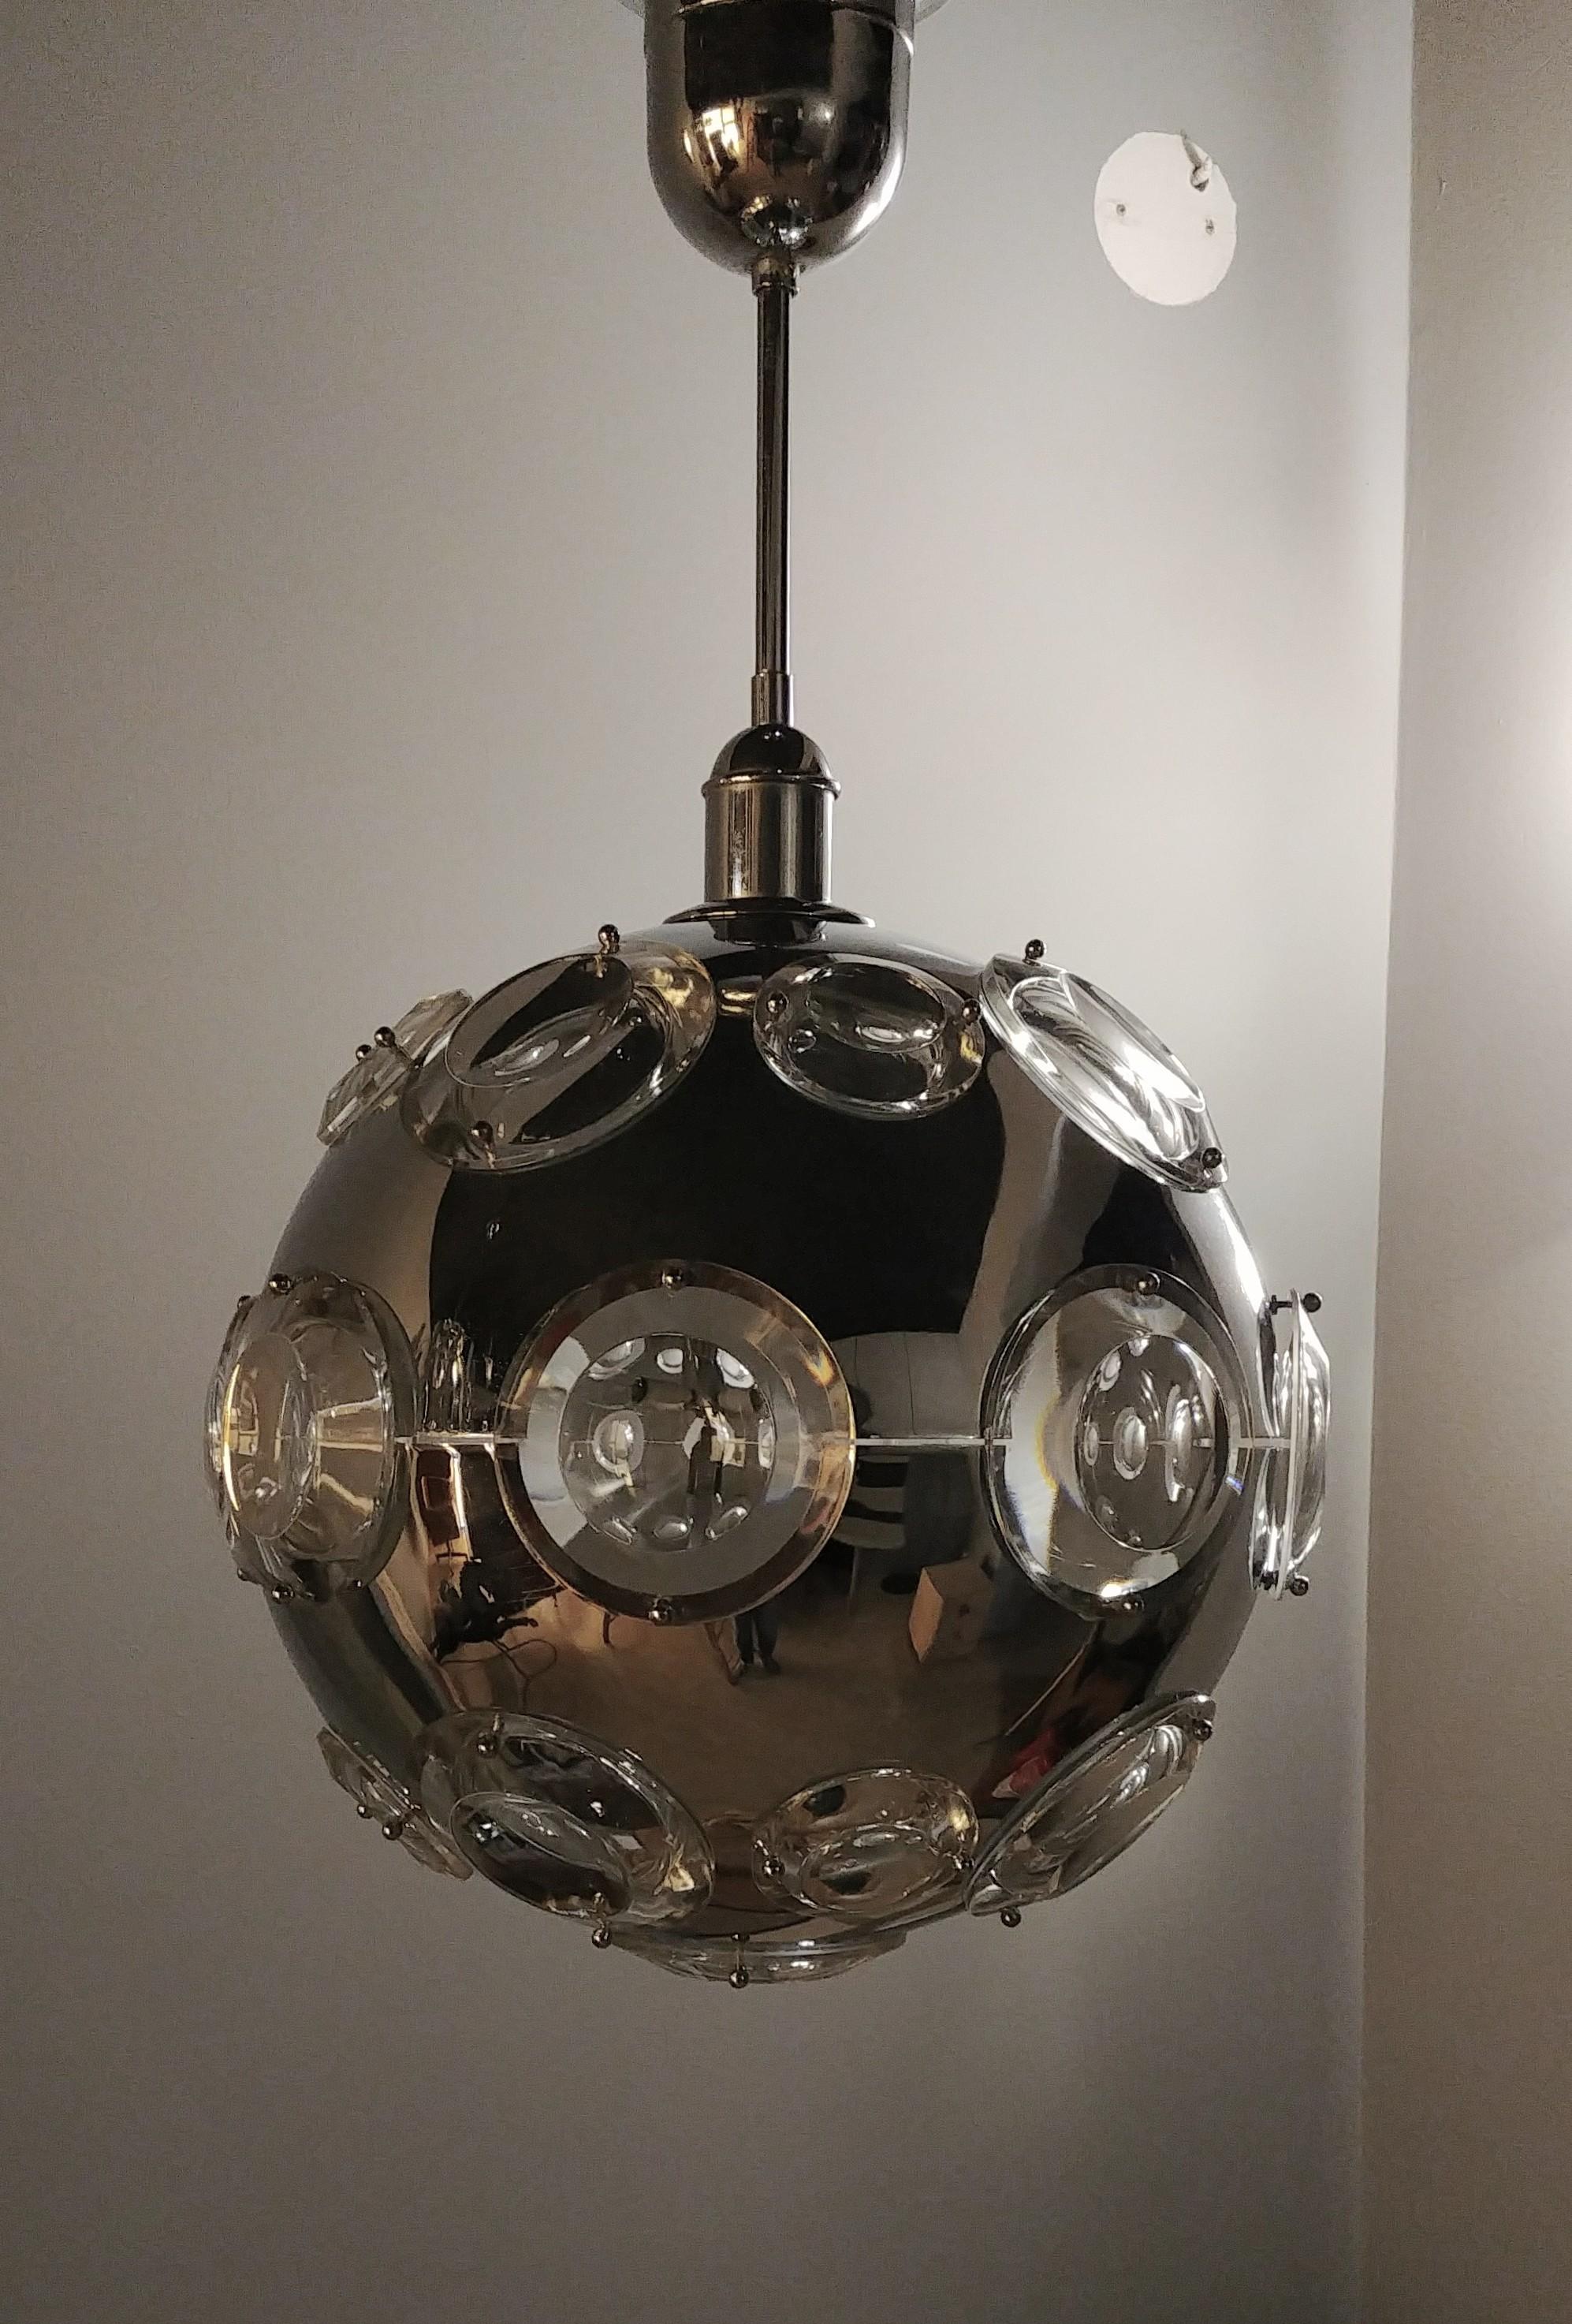 Fantastic sphere ceiling lamp at 5 lights, by the Italian designer O. Torlasco, from the 1960s. Chromed structure with two-dimensional beveled optical glass lenses, Italy.
 